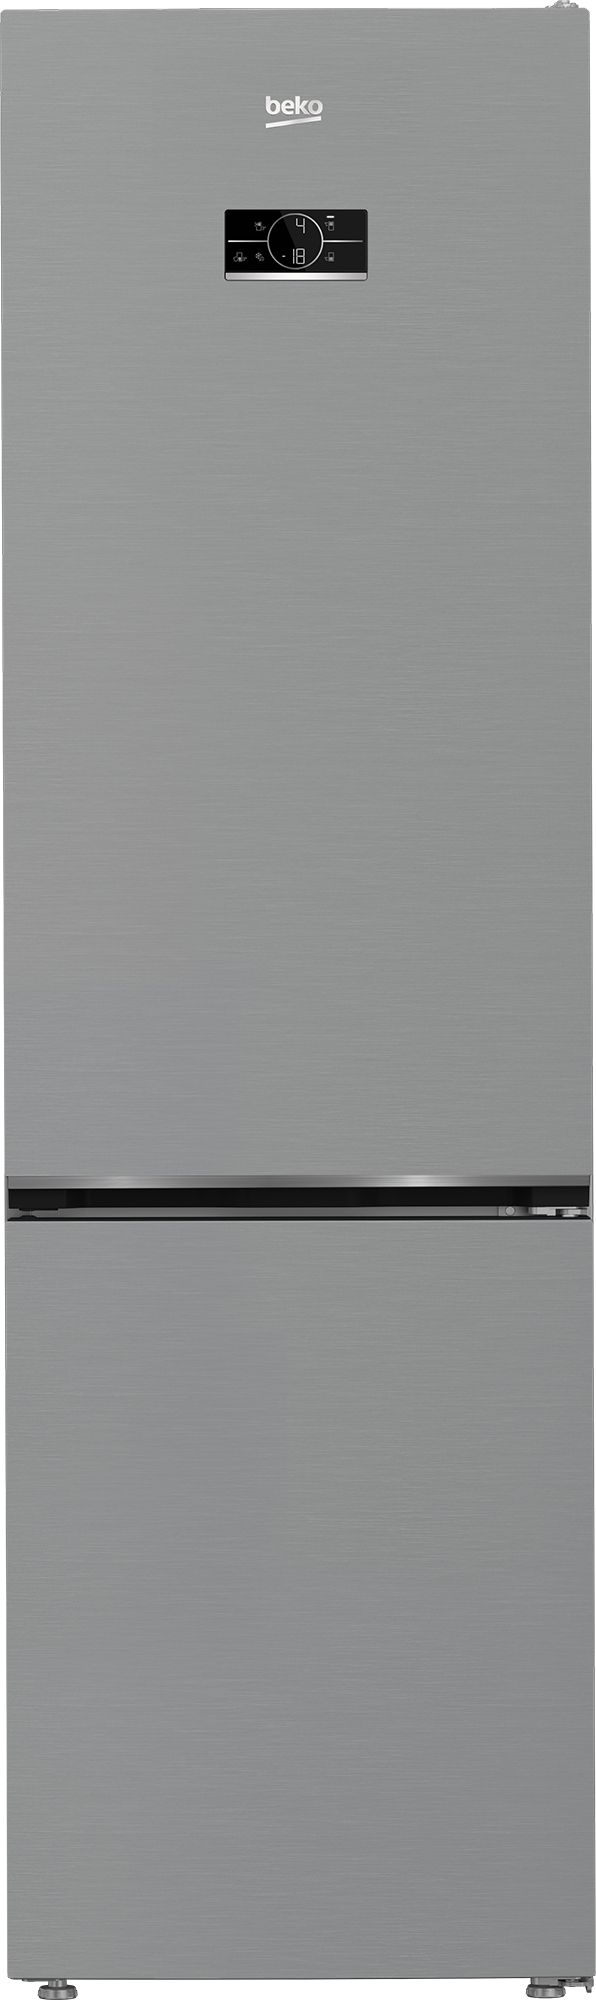 Beko CNG7603VPX 70/30 Frost Free Fridge Freezer - Brushed Steel - B Rated, Stainless Steel